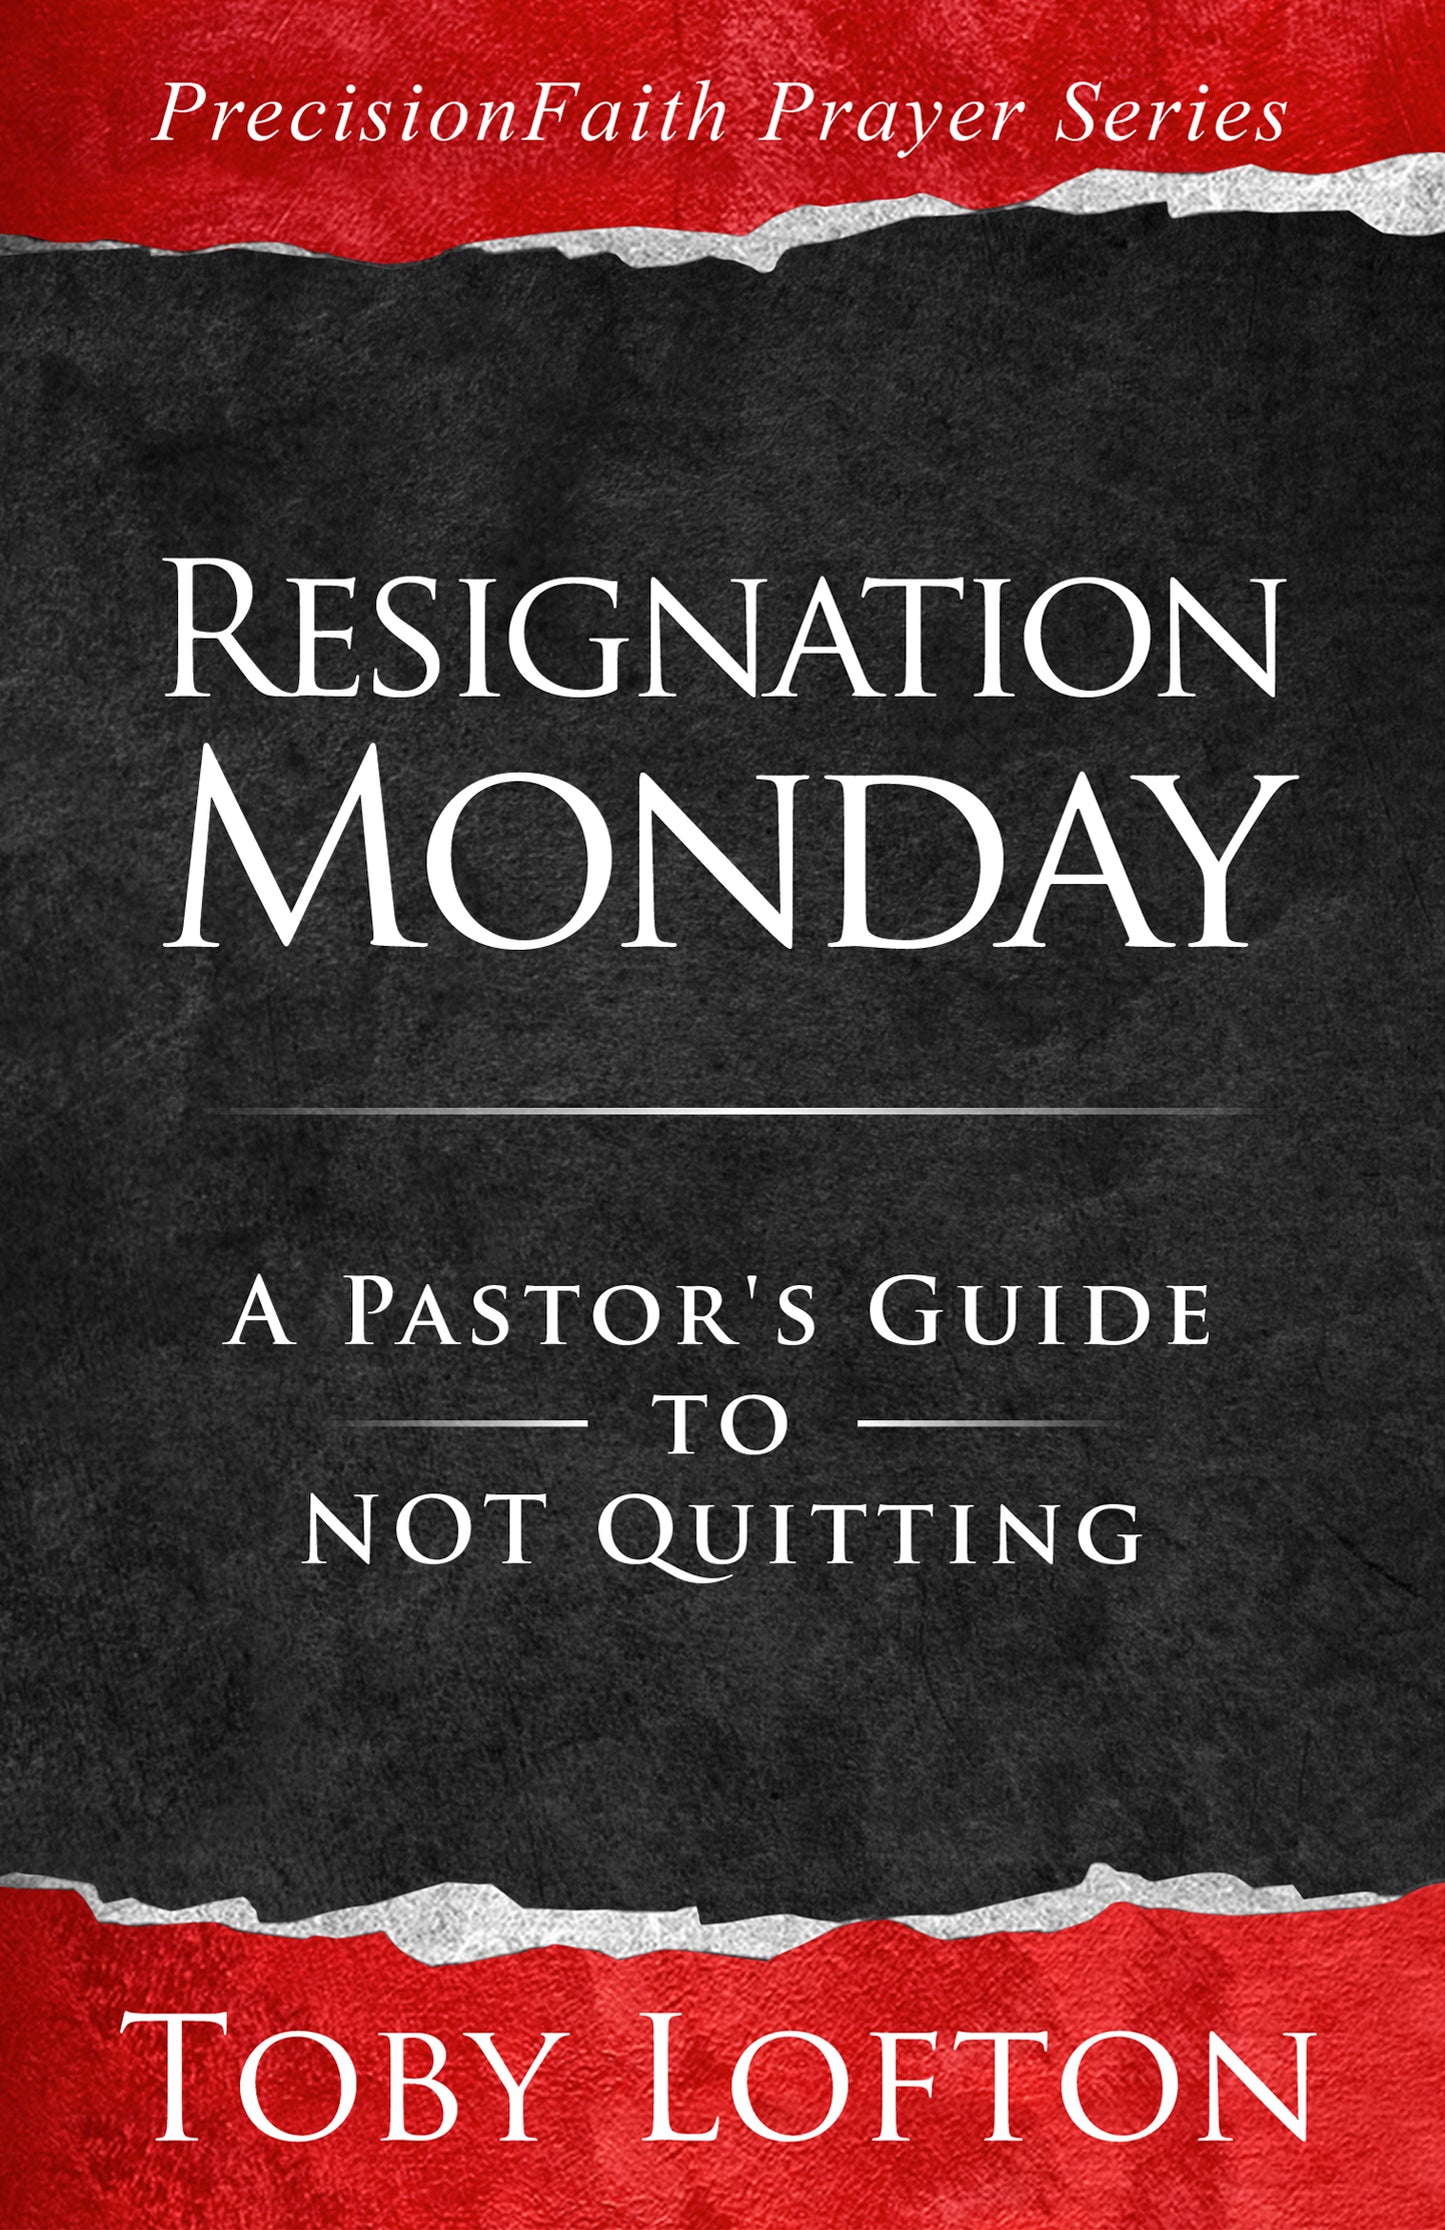 Resignation Monday: A Pastor's Guide to Not Quitting (eBook)